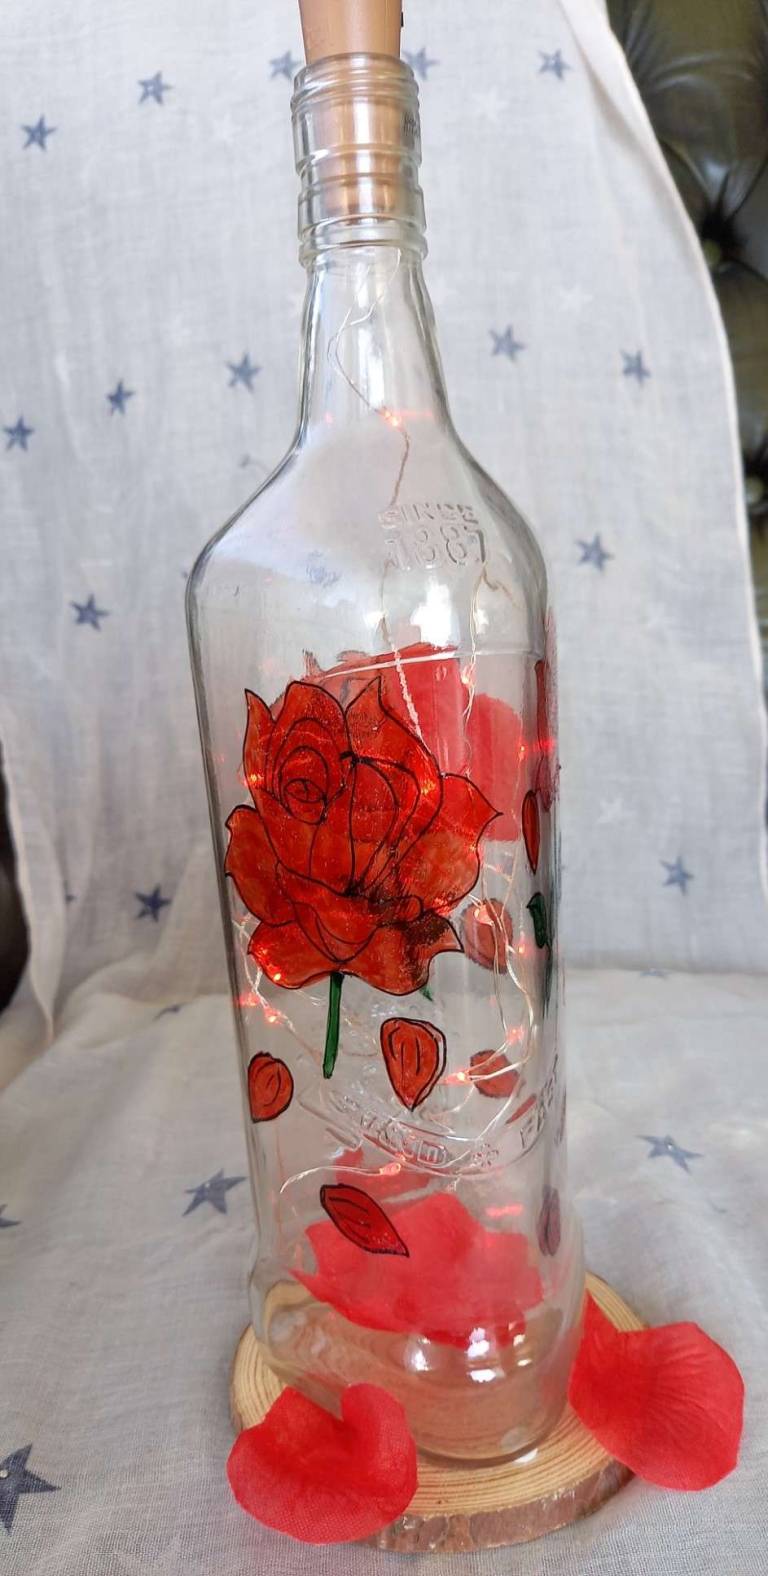 Enchanted Red Rose Light - Polly Farrell